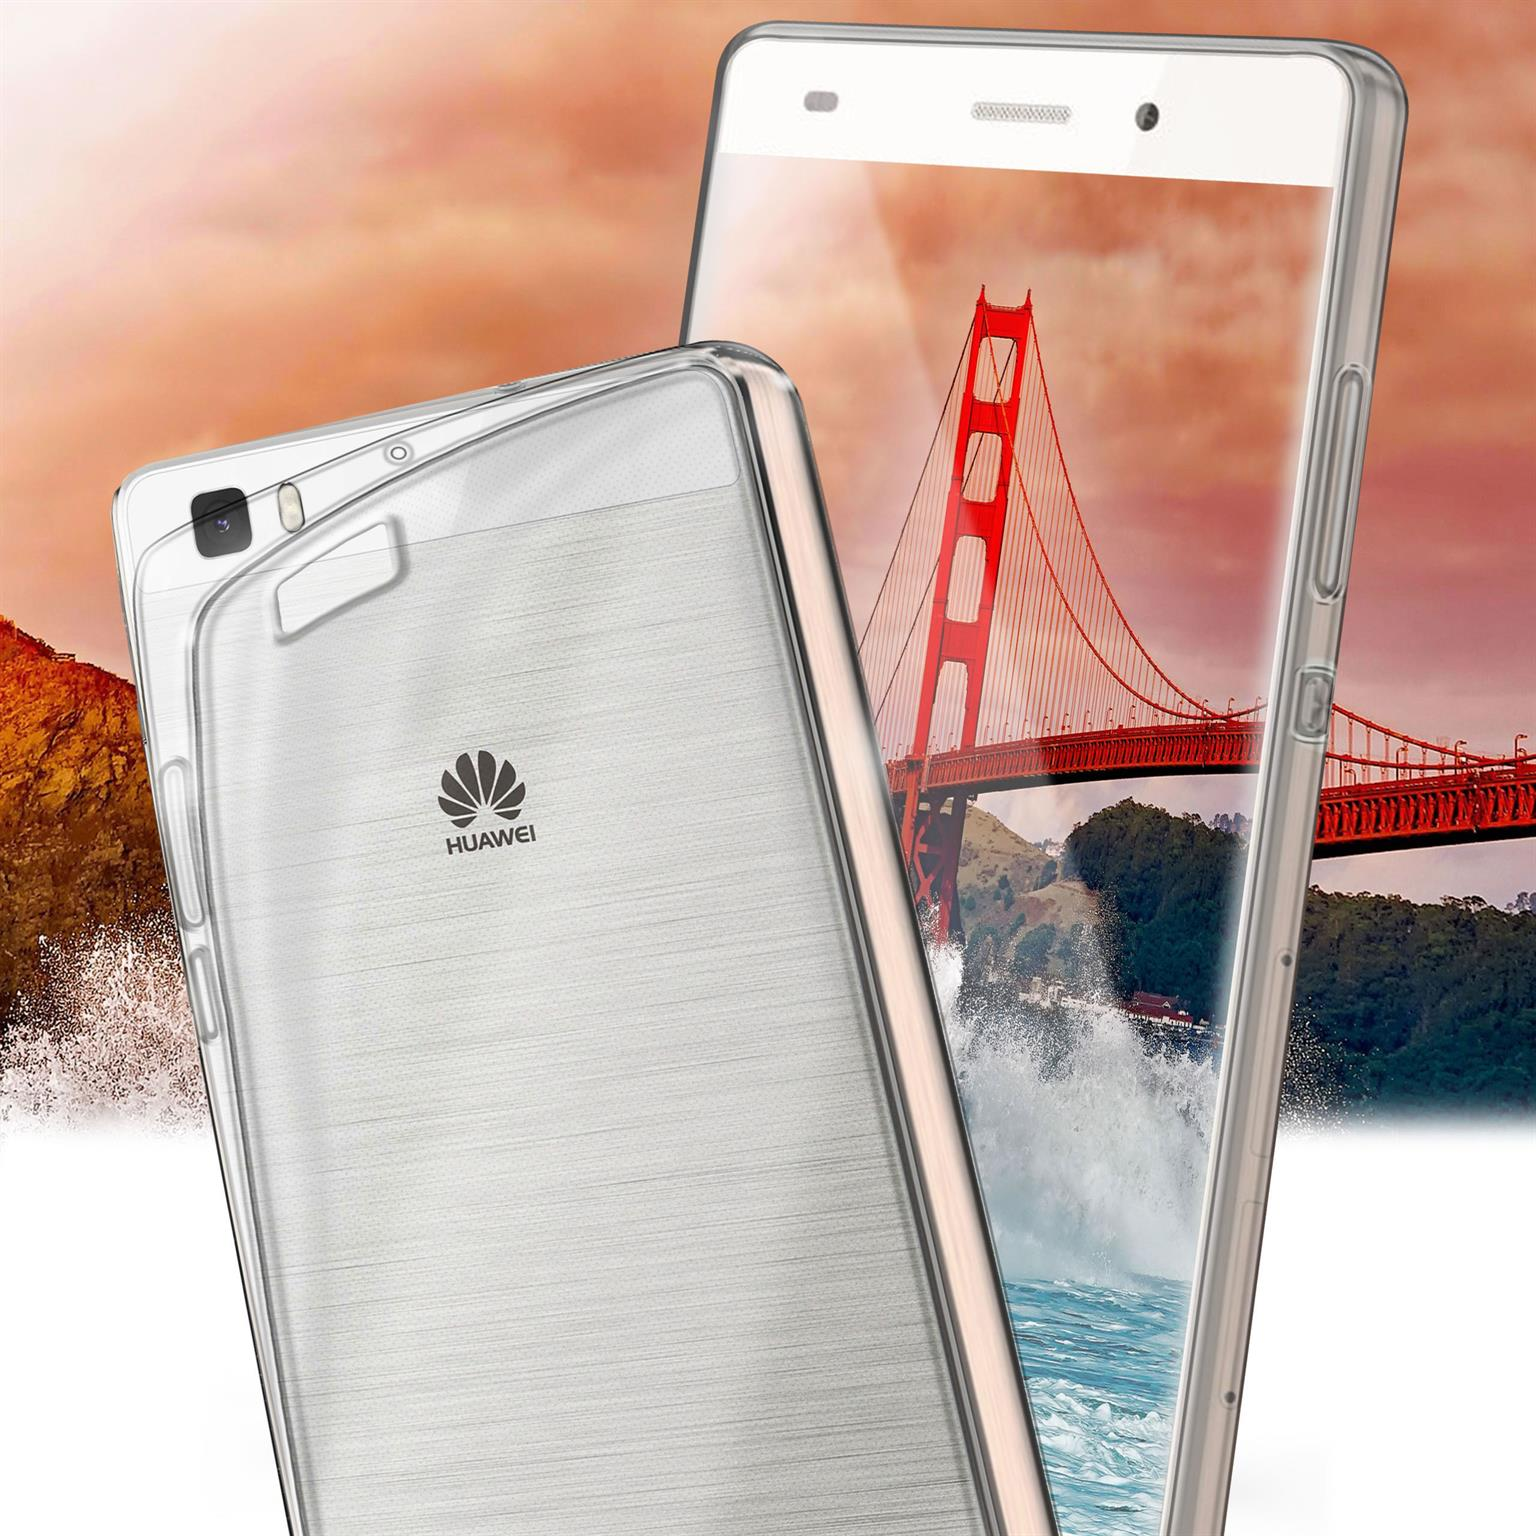 Case, Crystal-Clear Huawei, Backcover, MOEX 2015, Lite P8 Aero